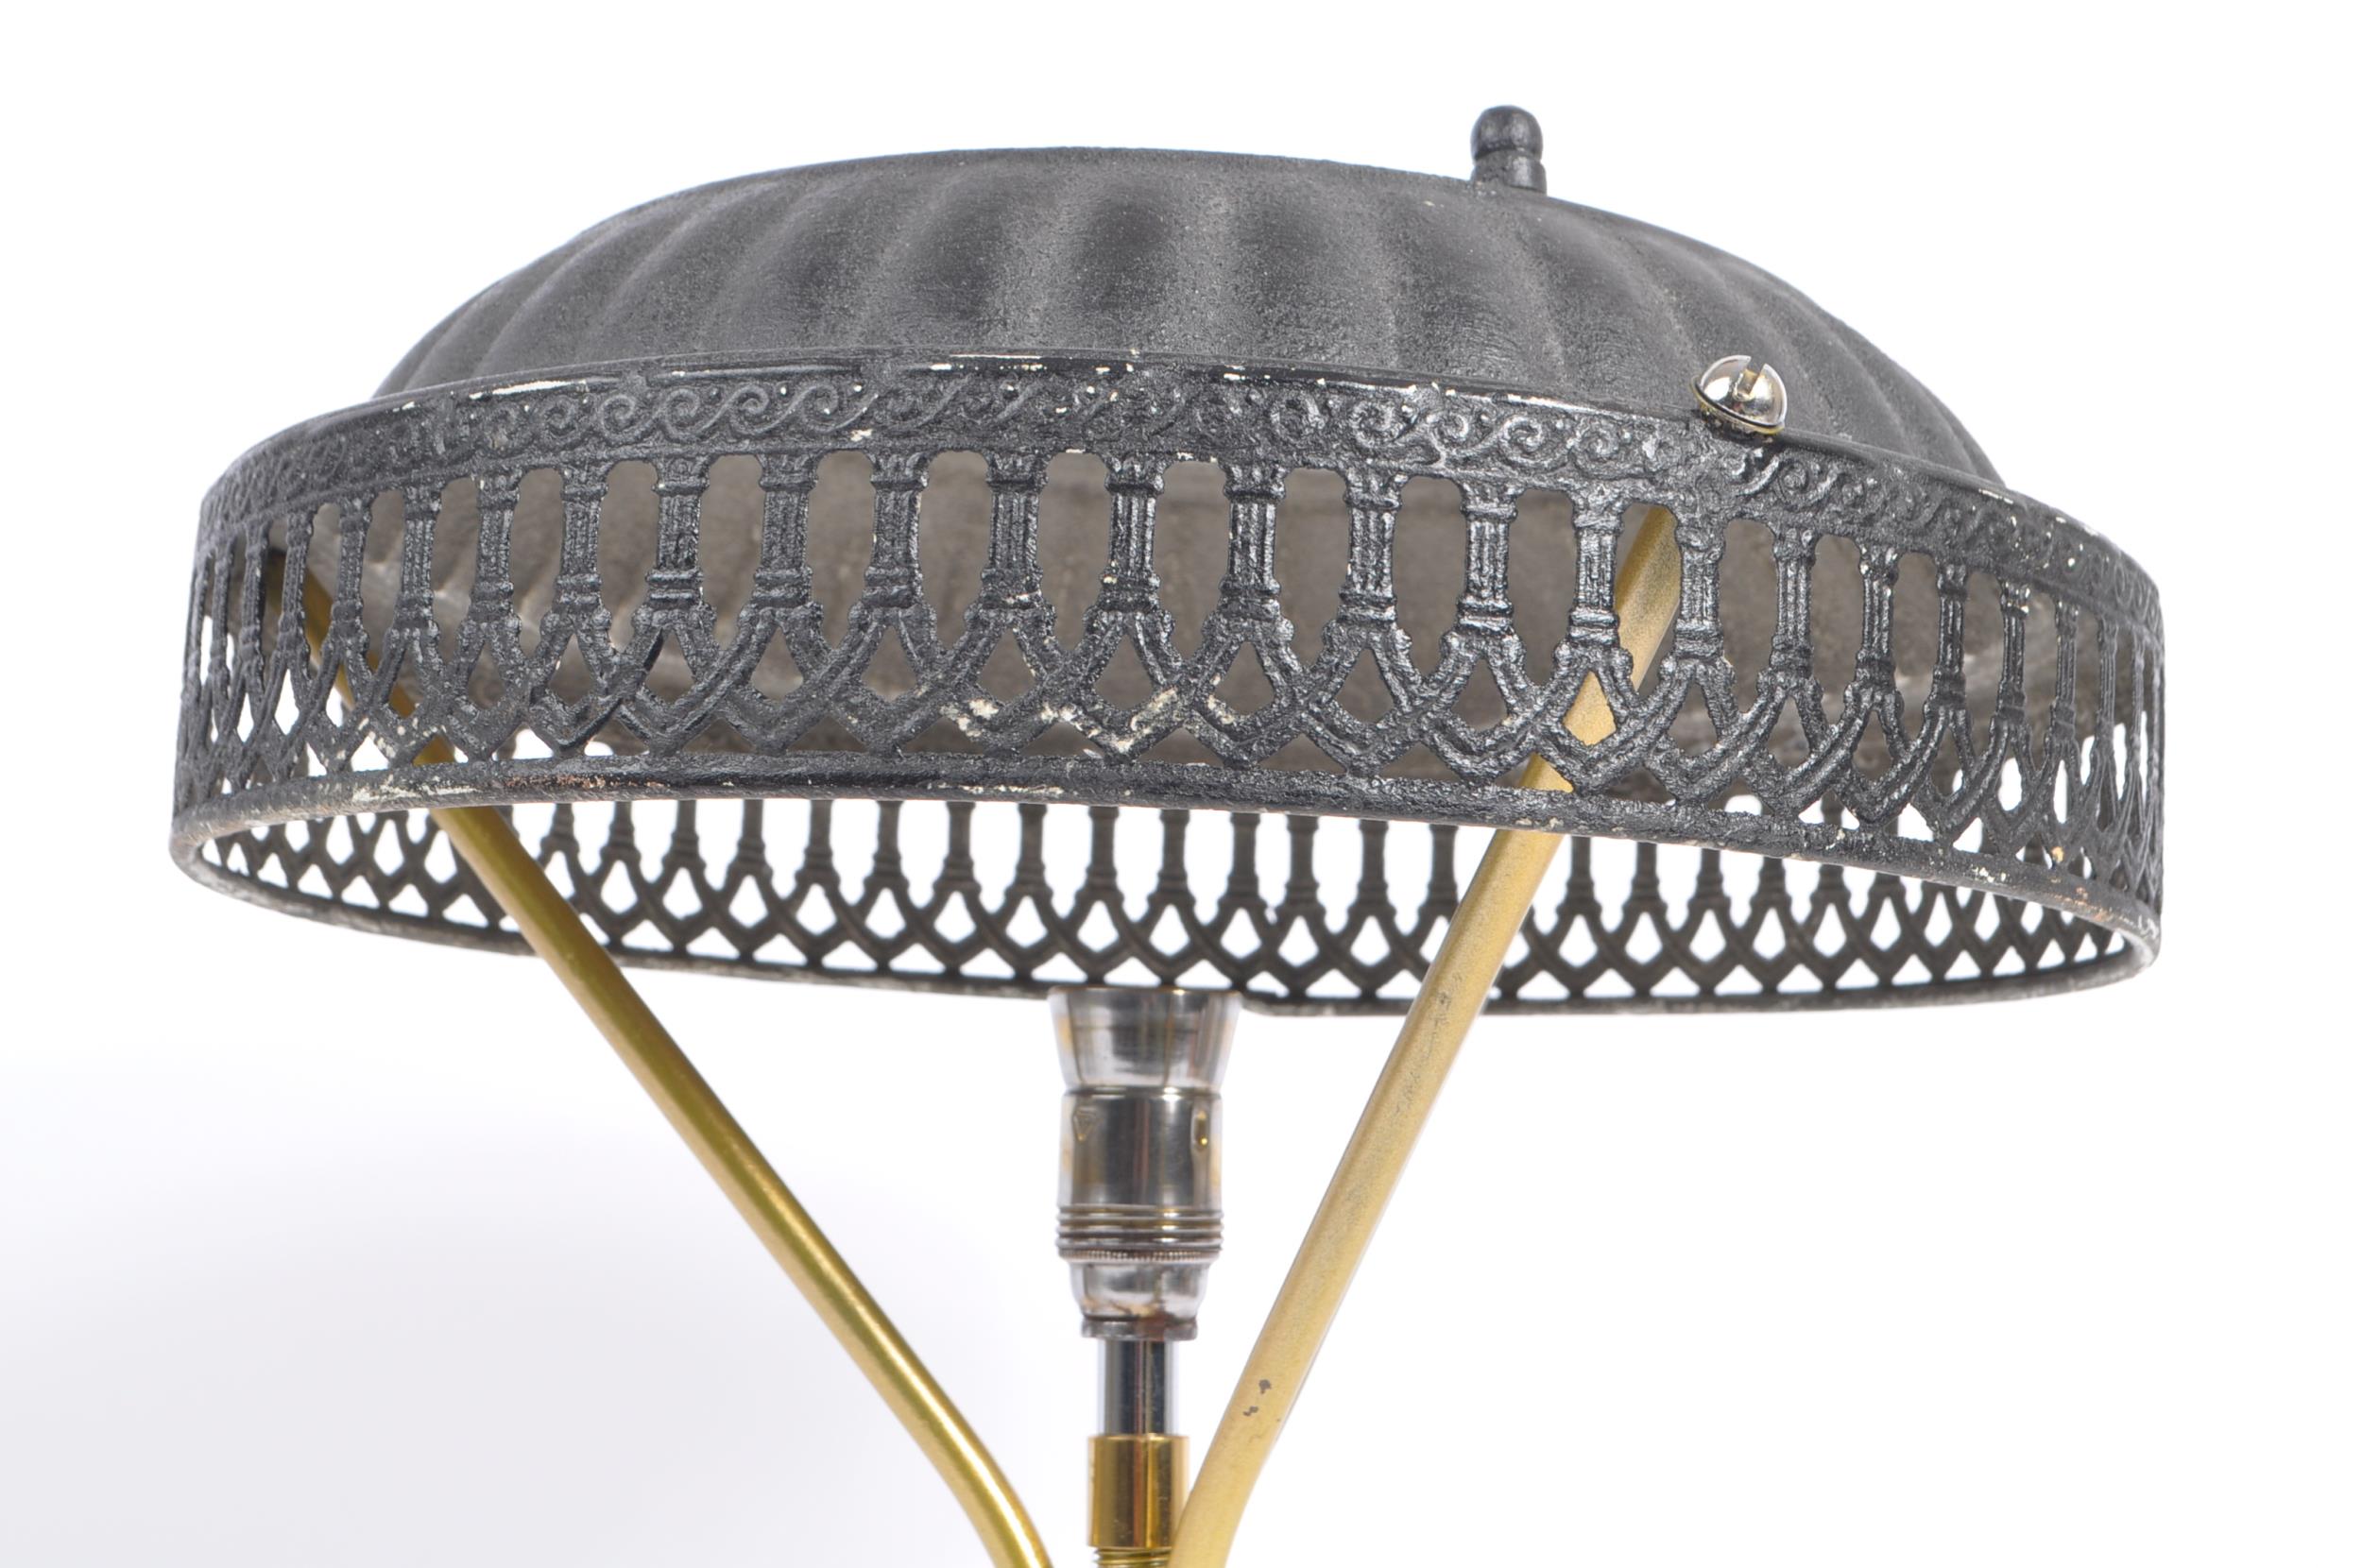 LATER 20TH CENTURY BRASS TRIPOD TABLE LAMP - Image 4 of 5